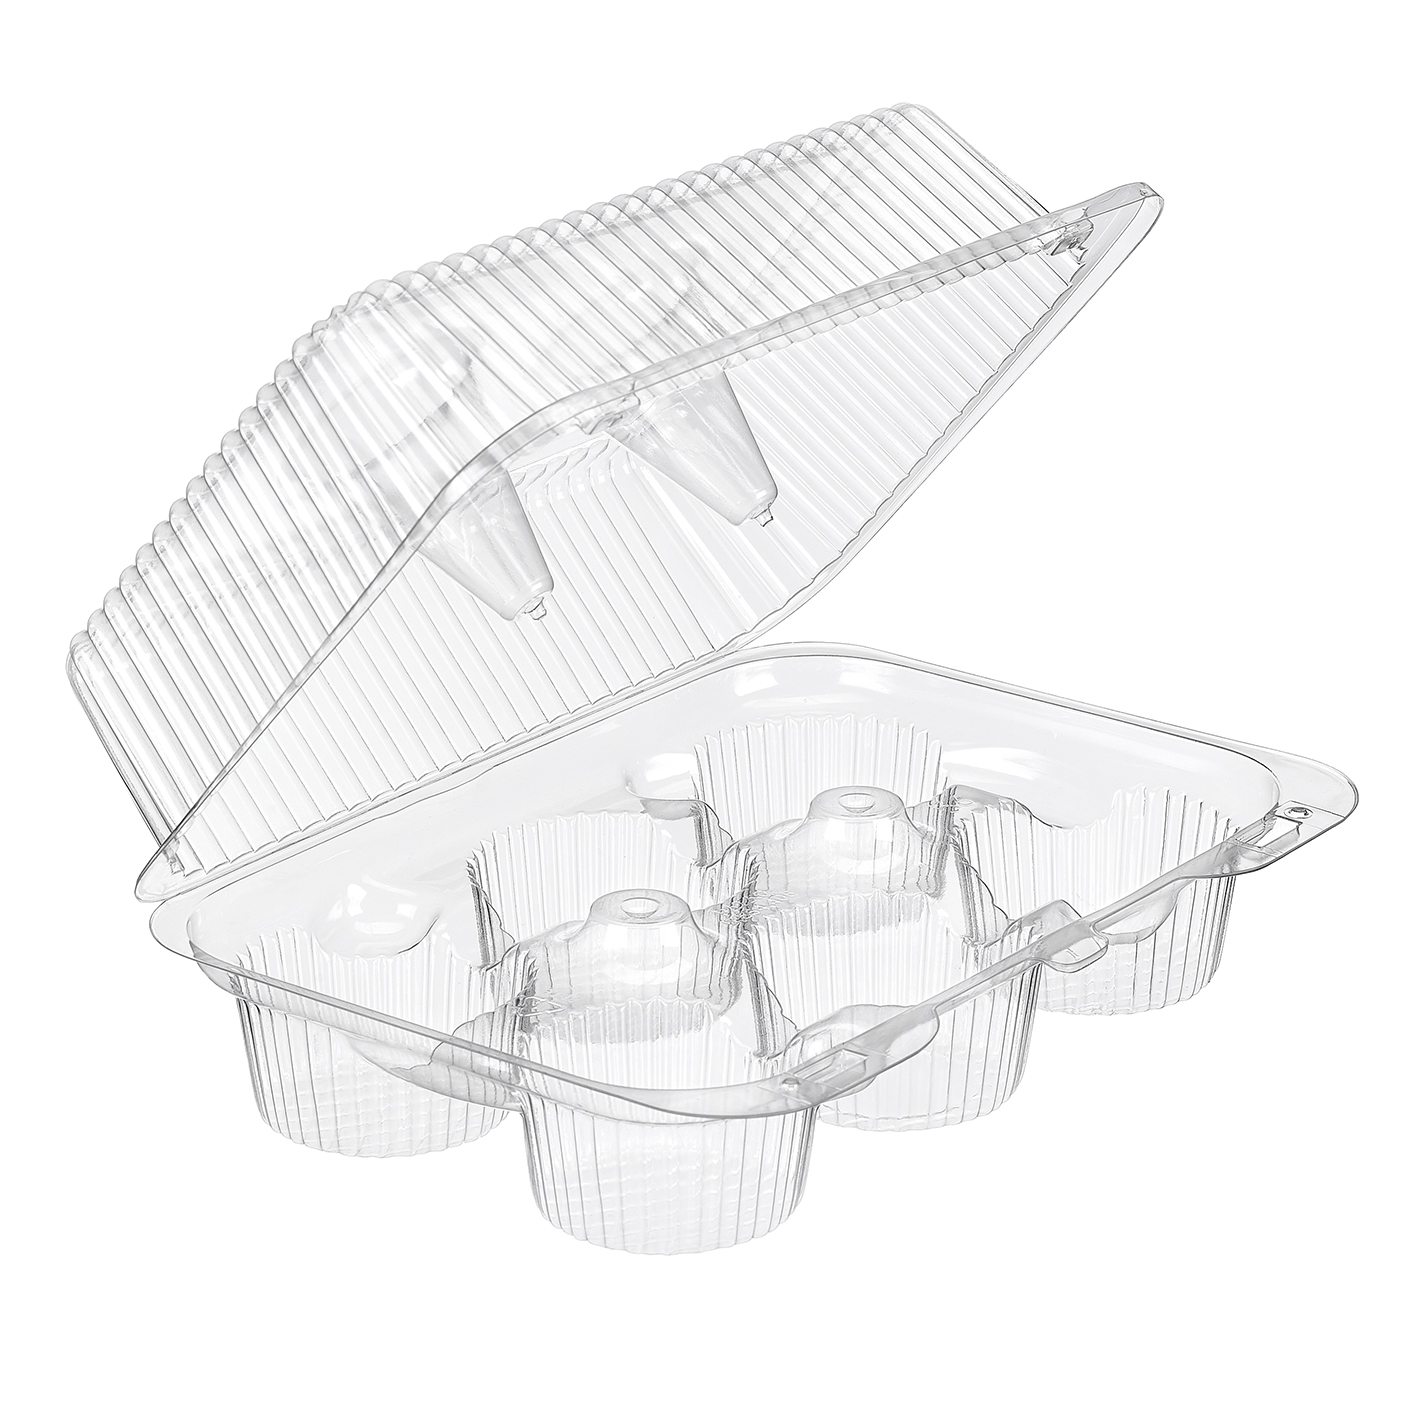 6 COUNT CUPCAKE CONTAINER
HIGH LID 300/CASE SLP56